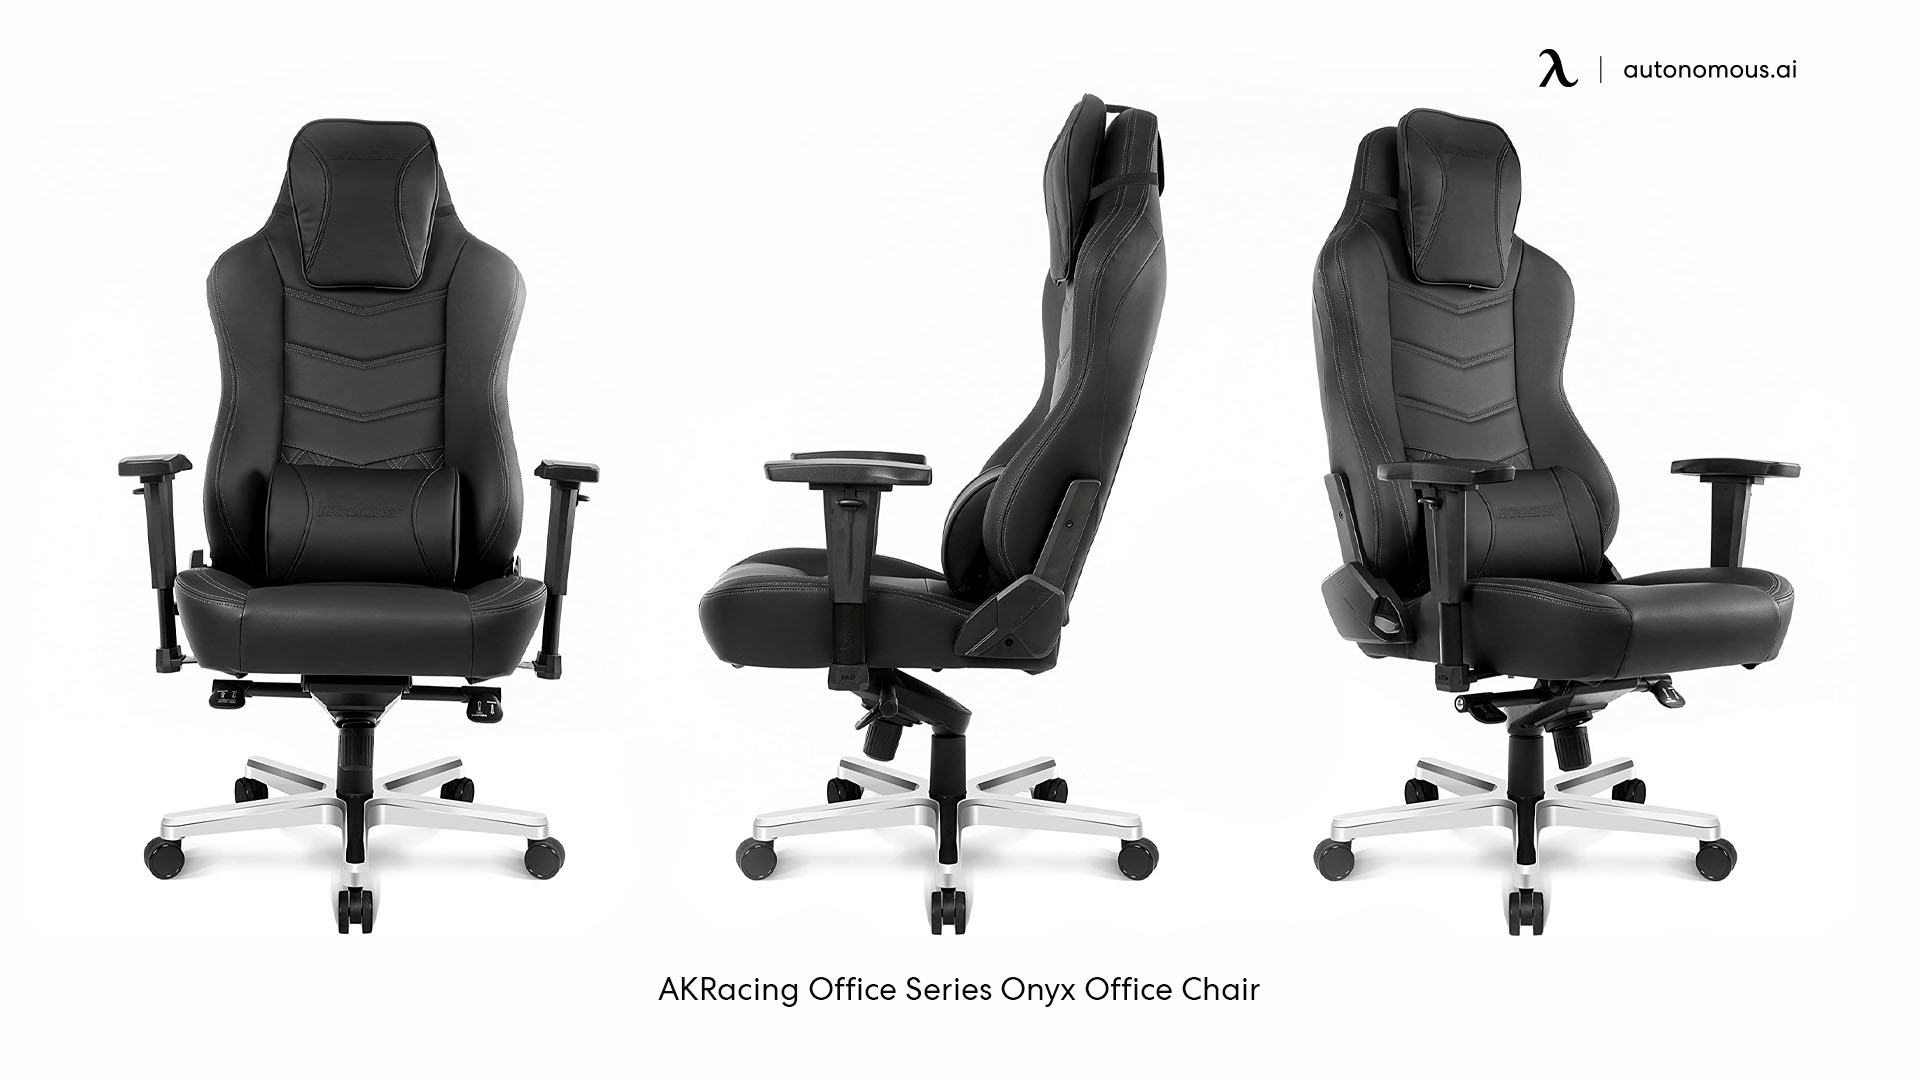 AKRacing Office Series Onyx Office Chair